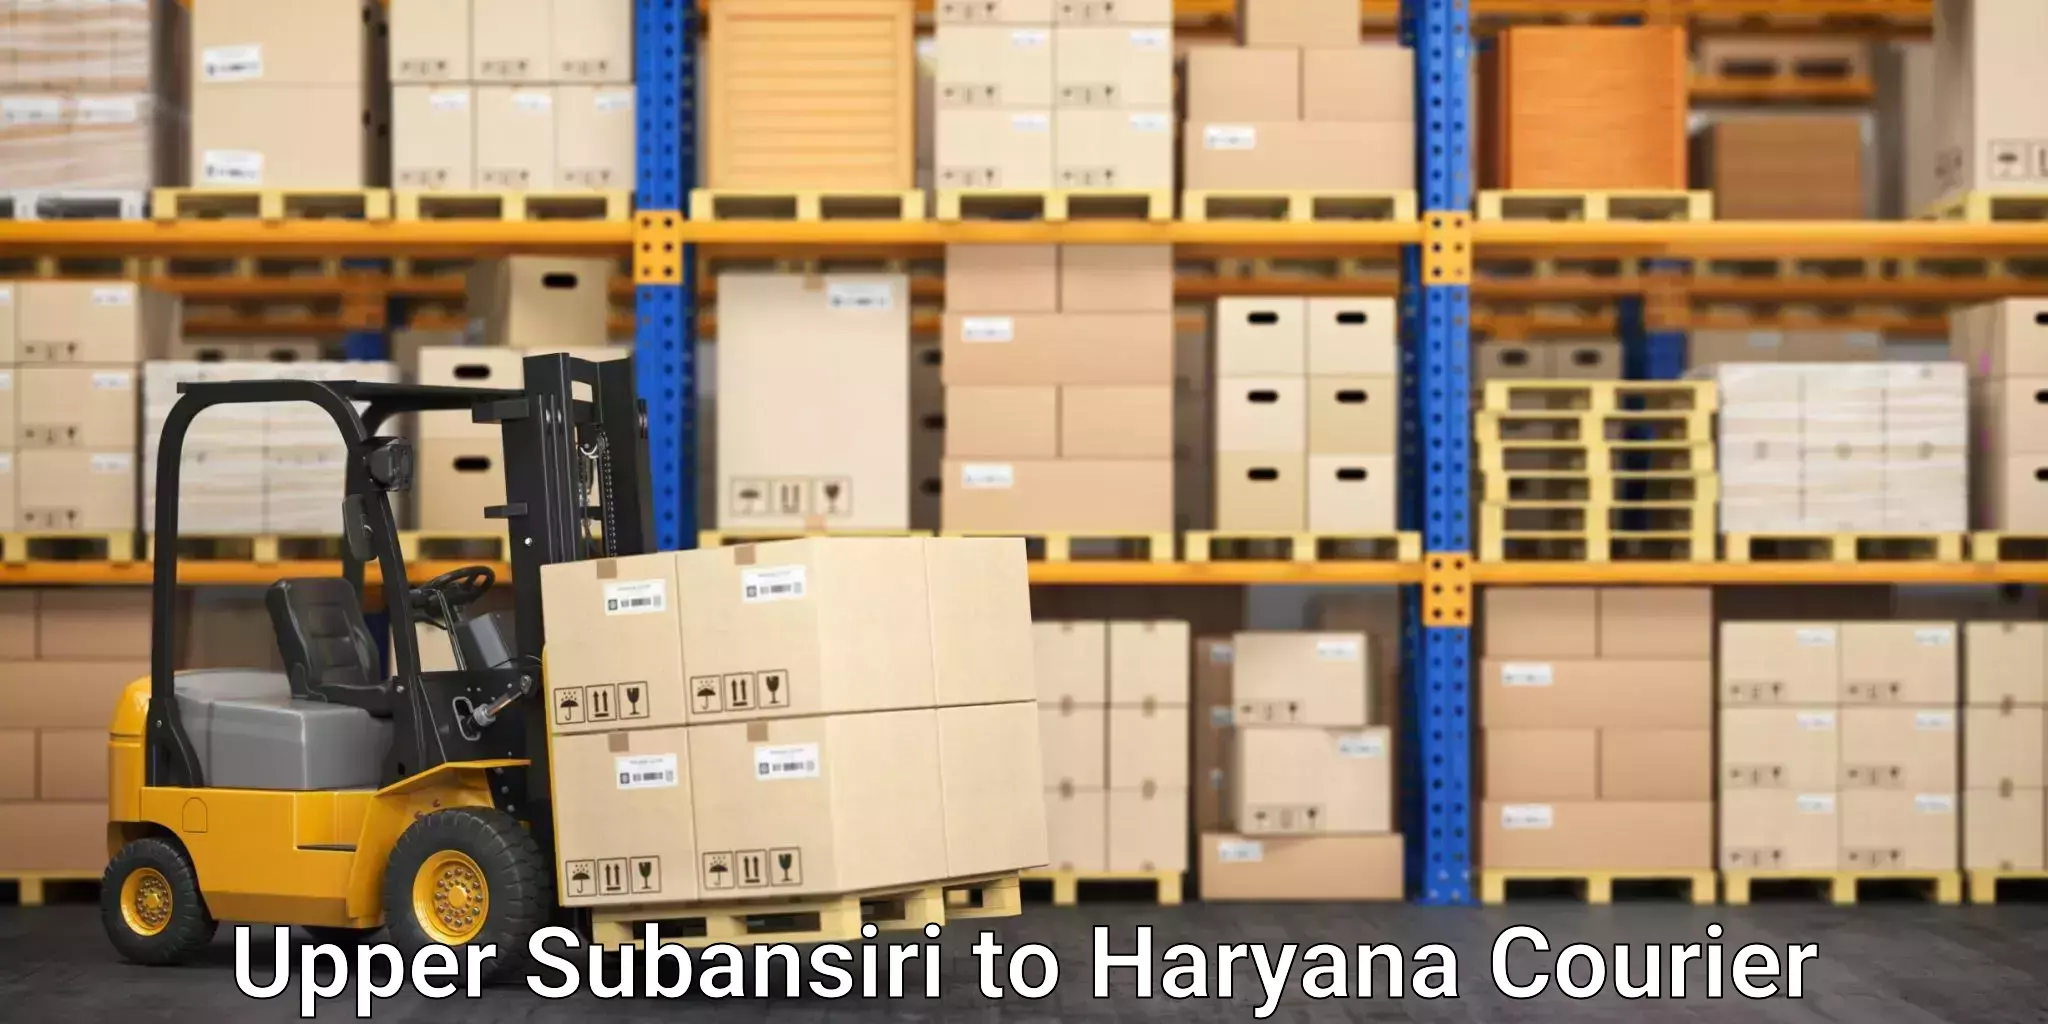 Reliable courier services in Upper Subansiri to Haryana